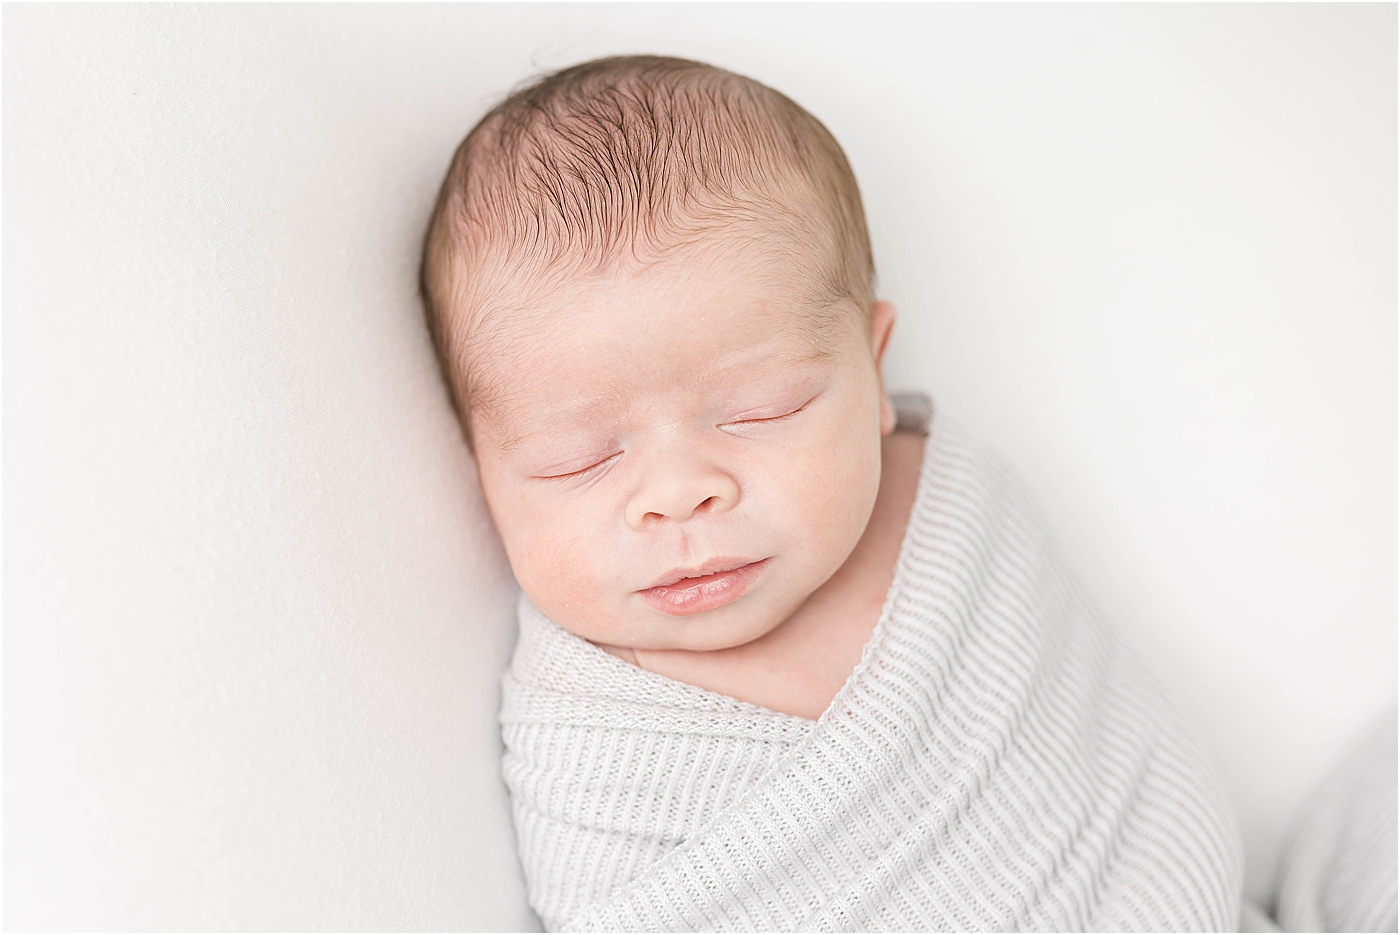 Baby boy swaddled for newborn photos with Lindsay Konopa Photography.